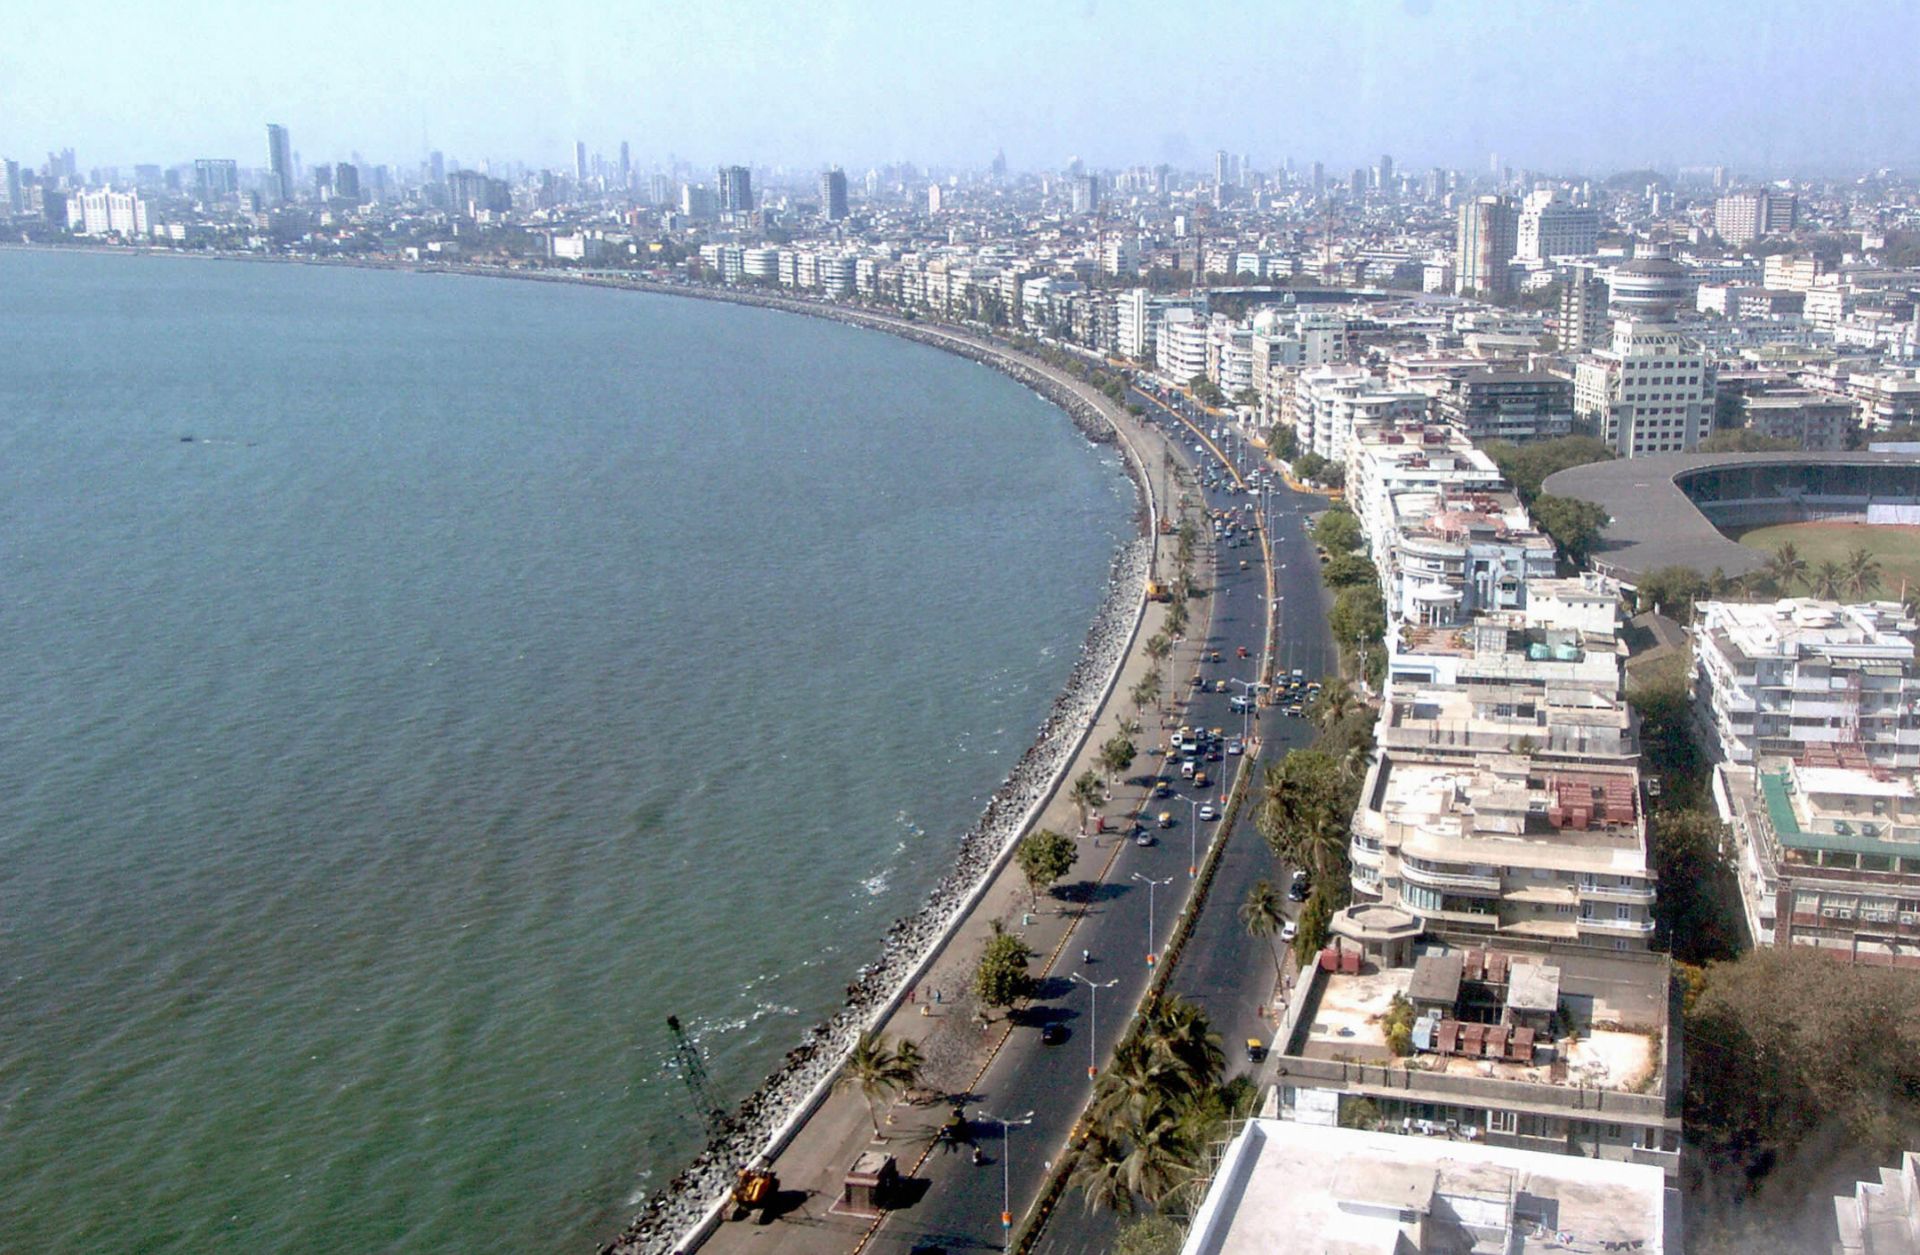 A view of Bombay.